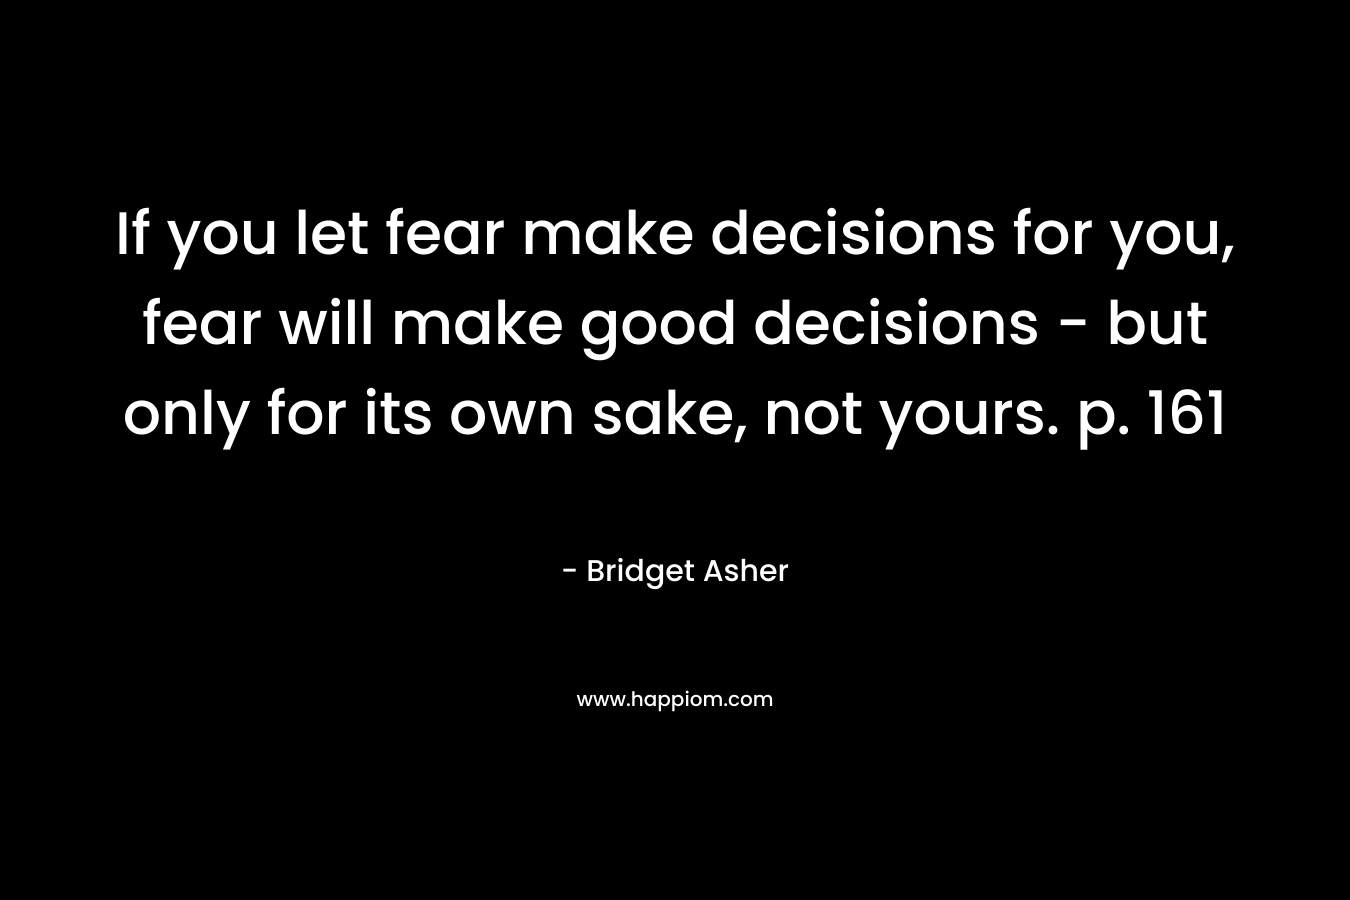 If you let fear make decisions for you, fear will make good decisions – but only for its own sake, not yours. p. 161 – Bridget Asher